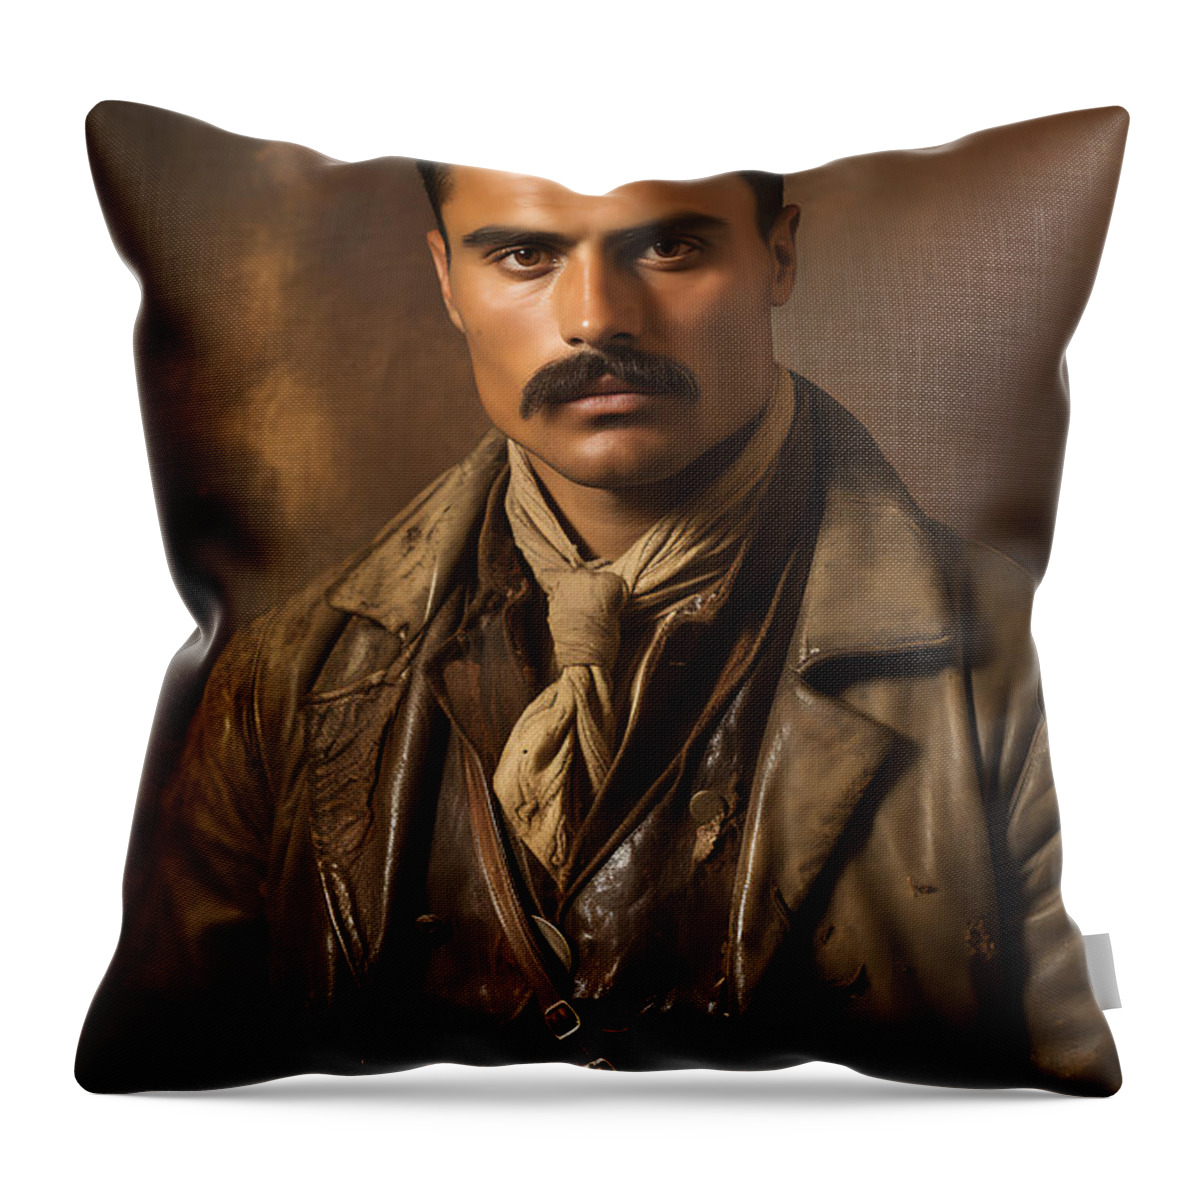 Vintage Retro Photo Portrait Of Emiliano Zapata Art Throw Pillow featuring the painting VINTAGE RETRO PHOTO PORTRAIT OF EMILIANO ZAPATA by Asar Studios by Asar Studios